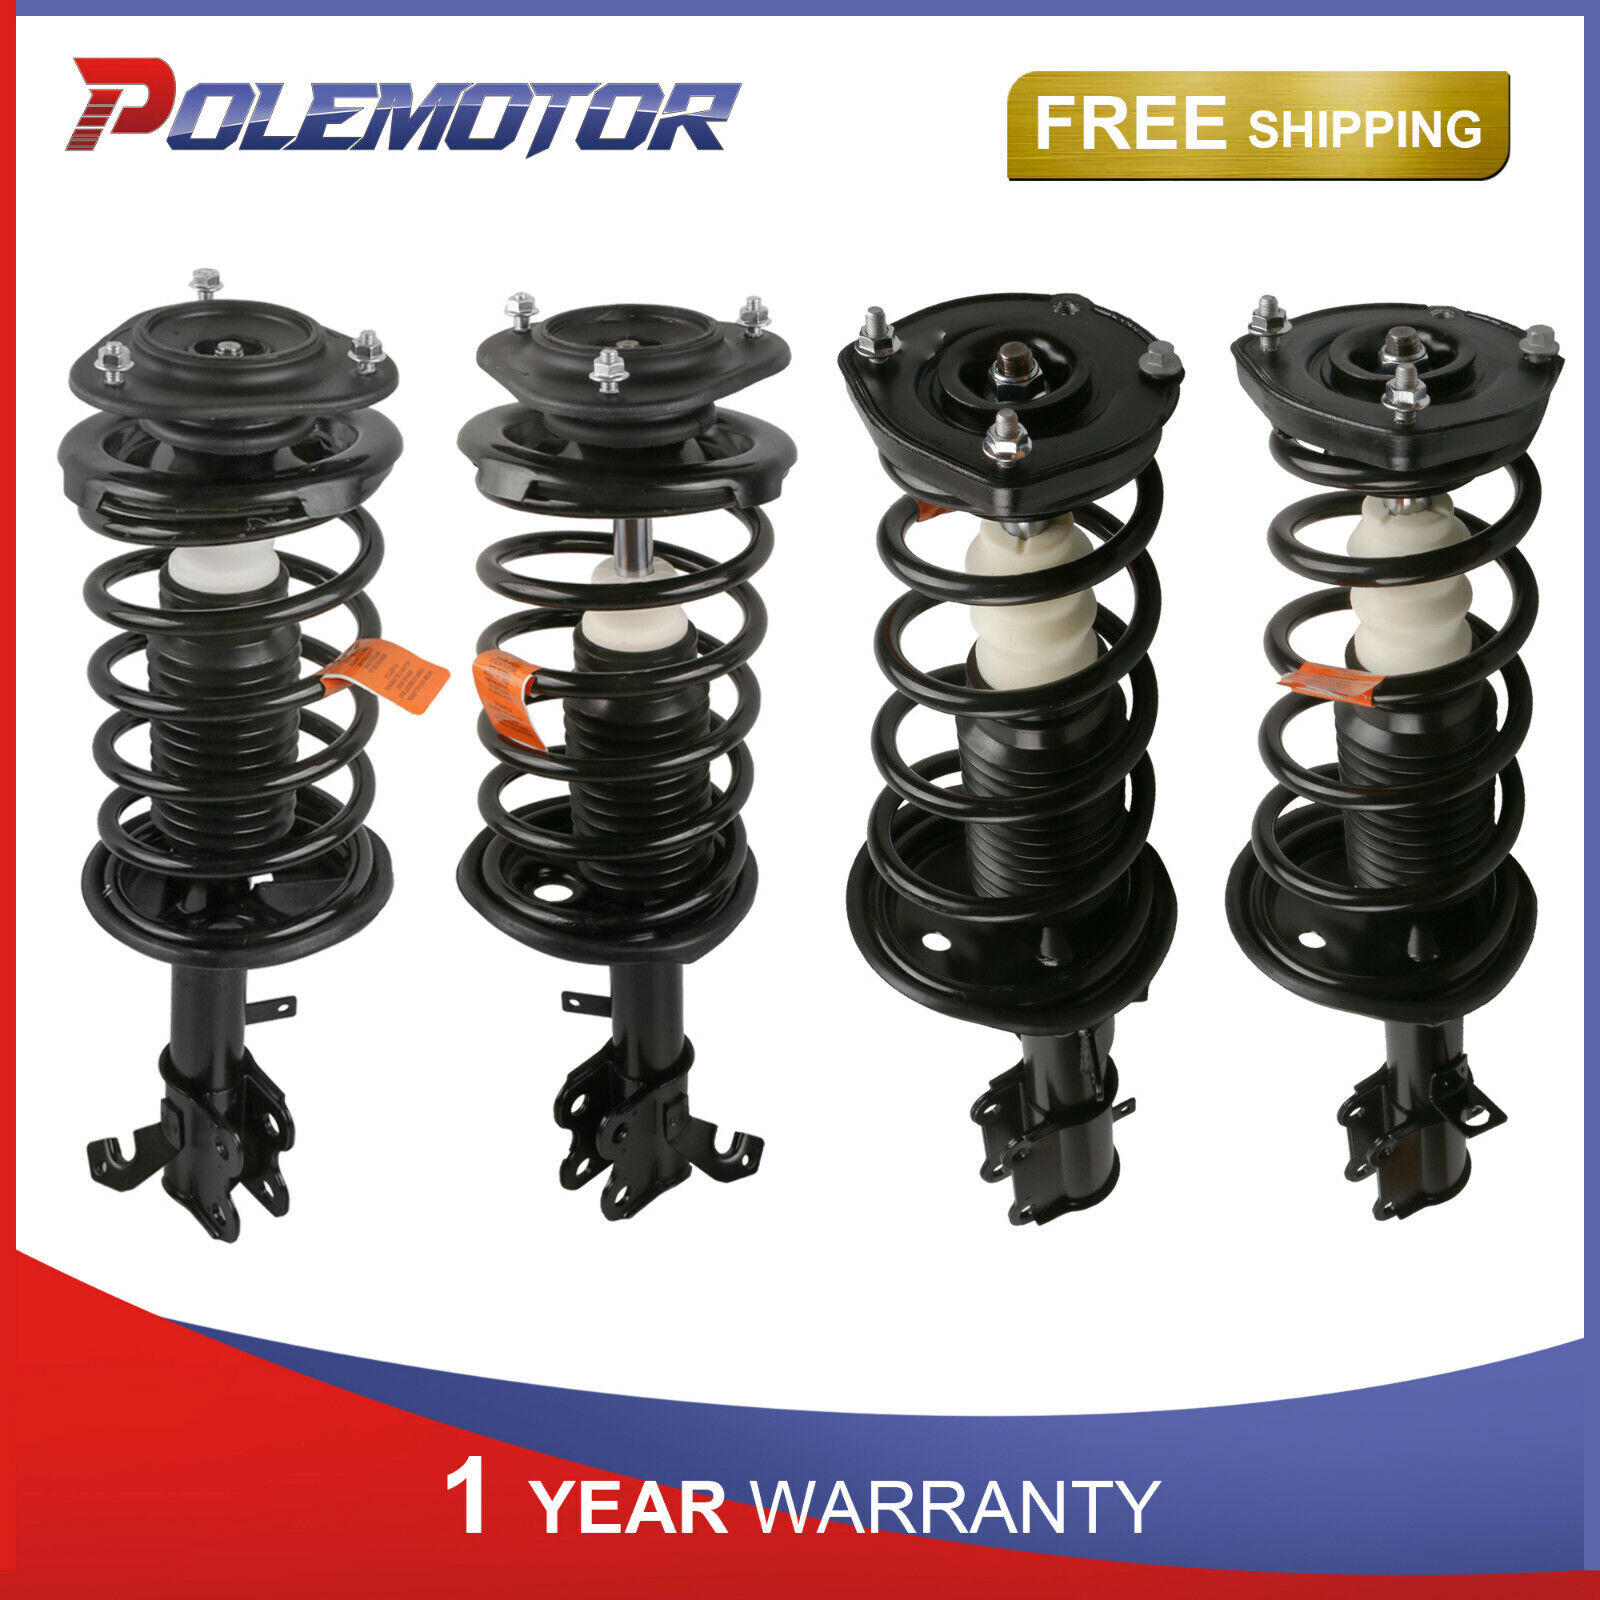 4x Shock Absorbers Struts Assembly For 93-02 Toyota Corolla Prizm Front & Rear